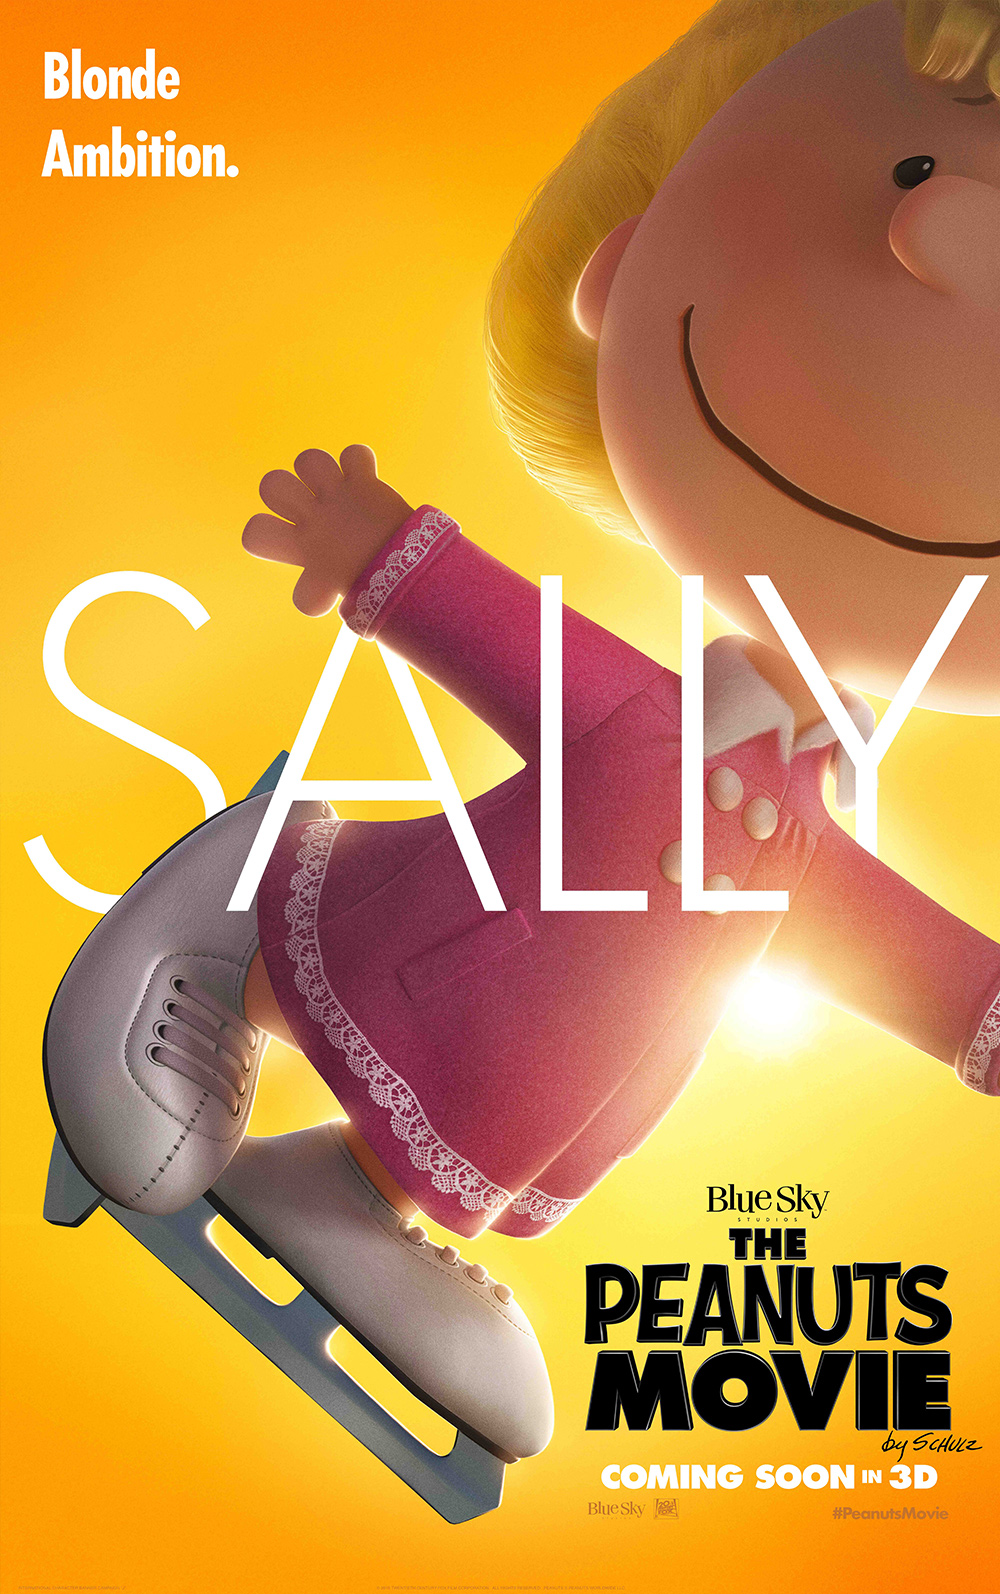 the-peanuts-movie-poster-salley-large.jpg